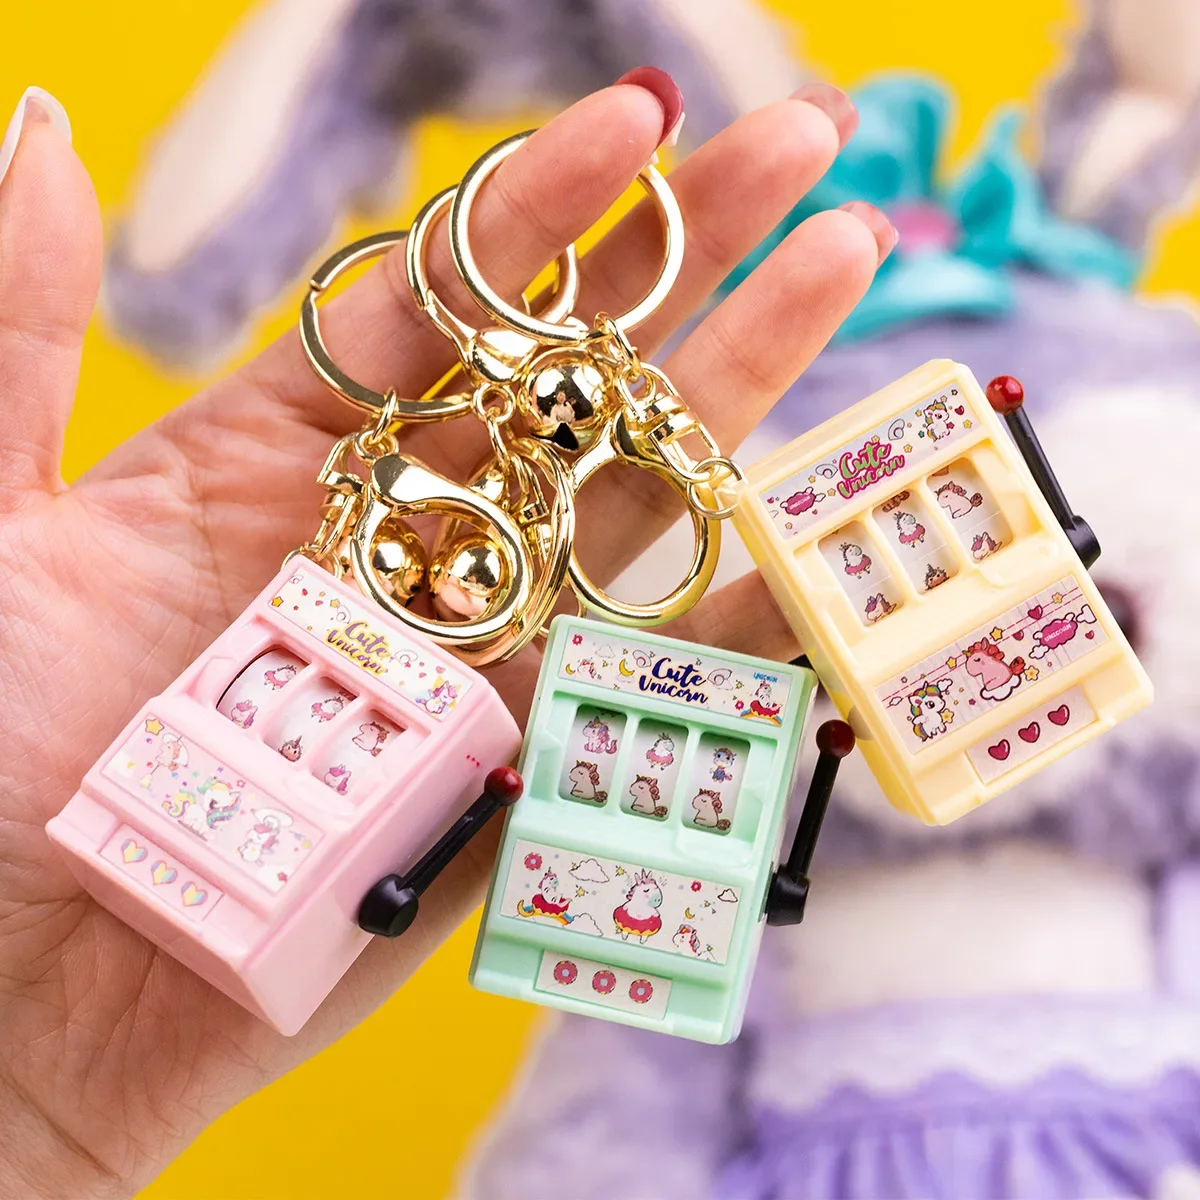 Creative Fruit Machine Slot Keychain Small Pendant That Can Be Played with, - $12.18